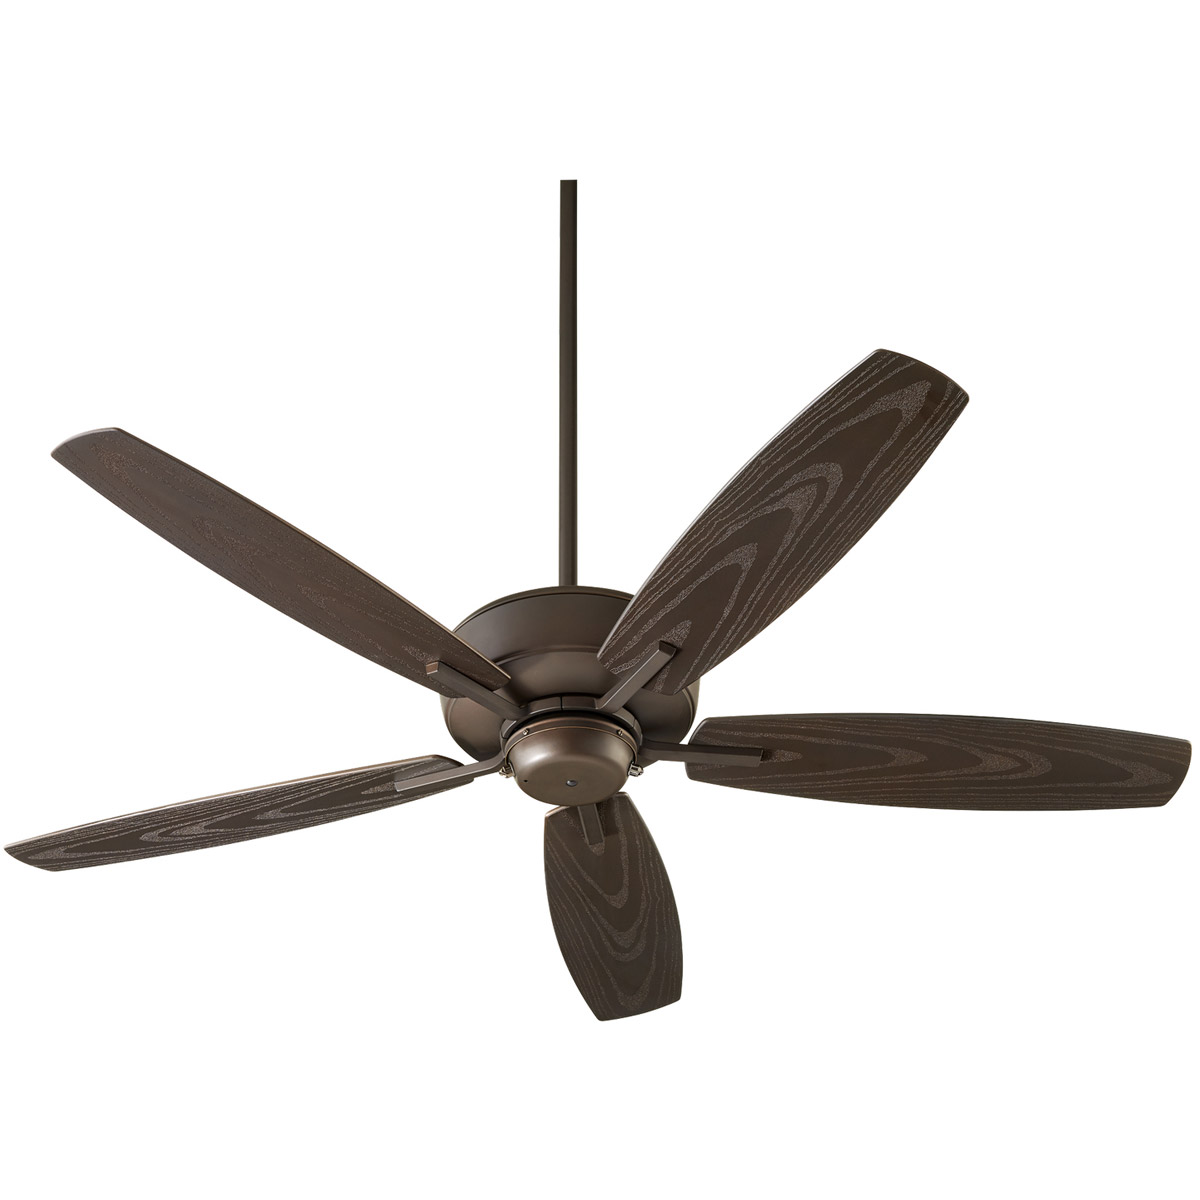 Breeze Patio 52 inch Oiled Bronze Patio Fan in Not Included, Quorum Home